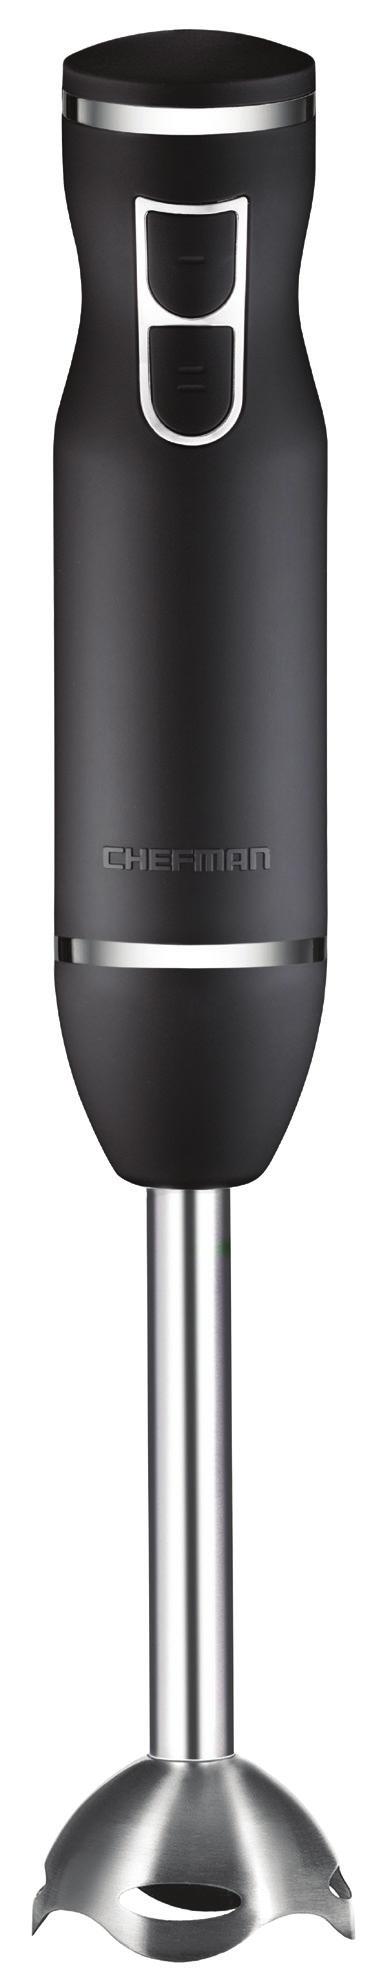 HAND BLENDER USER GUIDE Now that you have purchased a Chefman product you can rest assured in the knowledge that as well as your 1-year parts and labor warranty you have the added peace of mind of